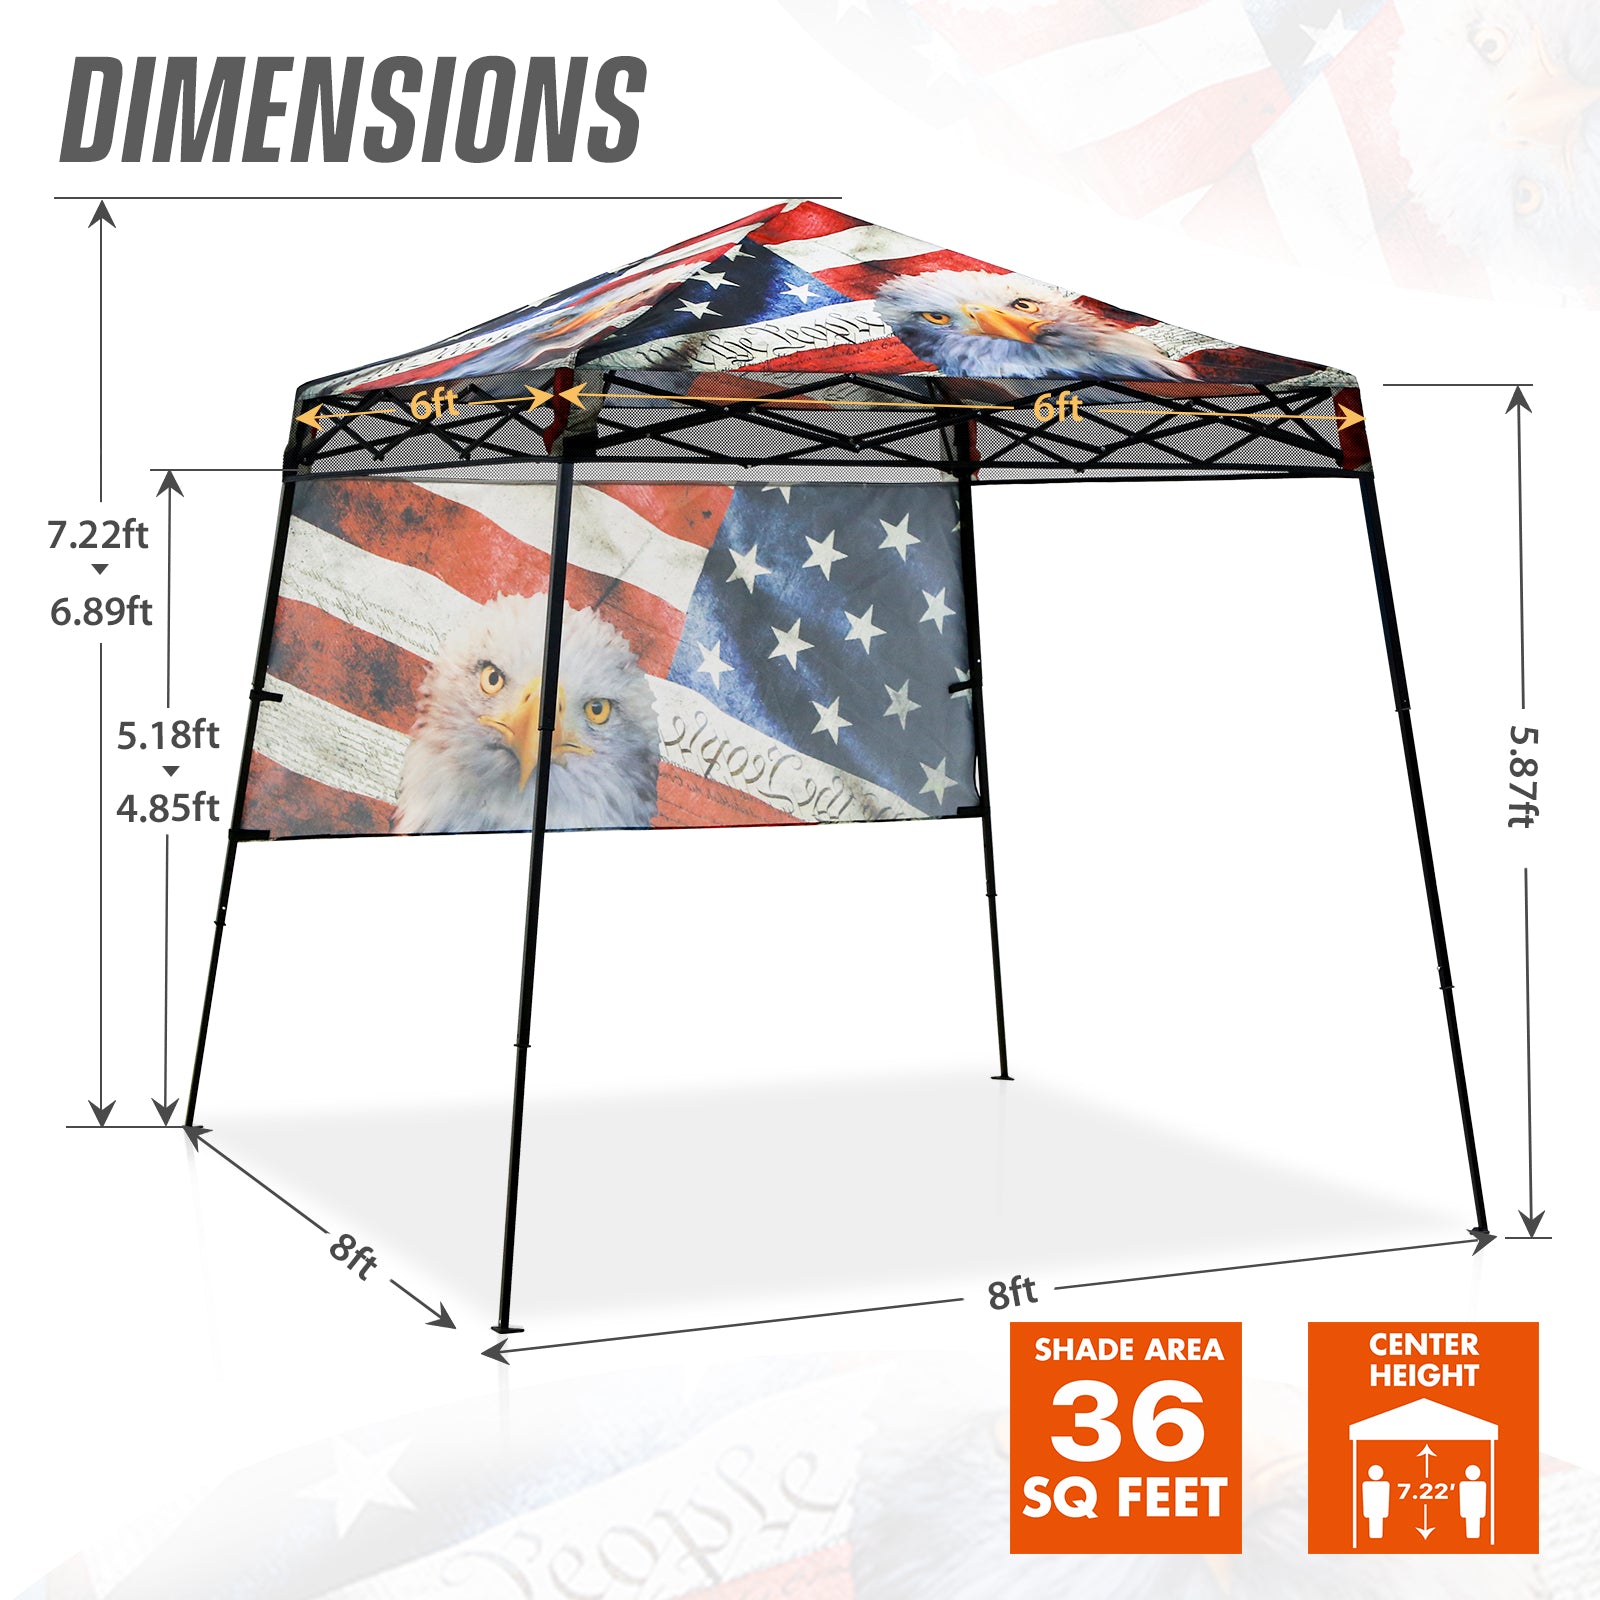 Eagle Peak Shade Graphix Day Tripper 8x8 Pop Up Canopy Tent with 